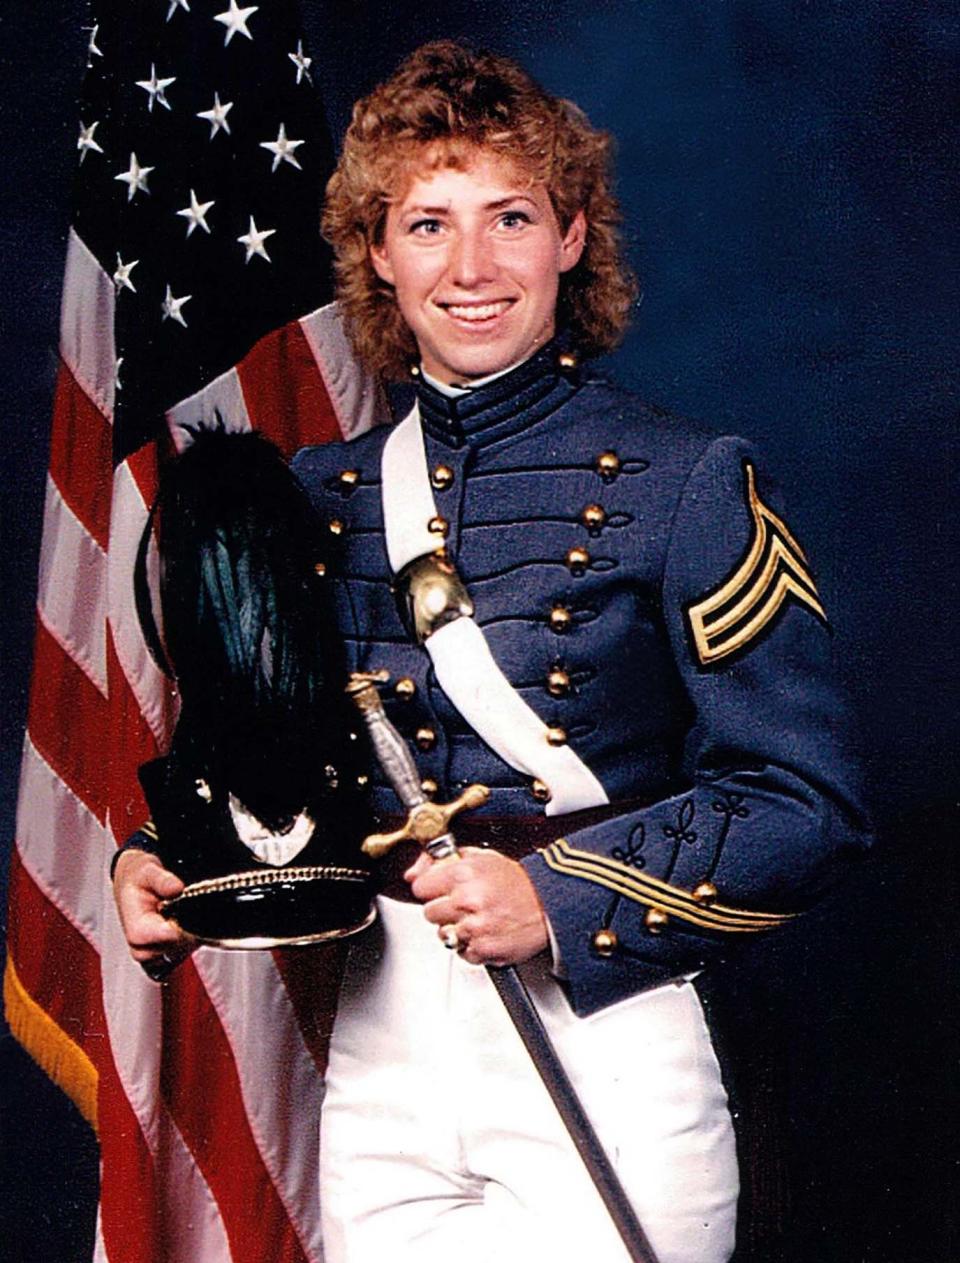 Lori Tompos, who graduated from the U.S. Military Academy in 1989, served as an air defense artillery officer with the Patriot missile system during Operation Desert Storm.